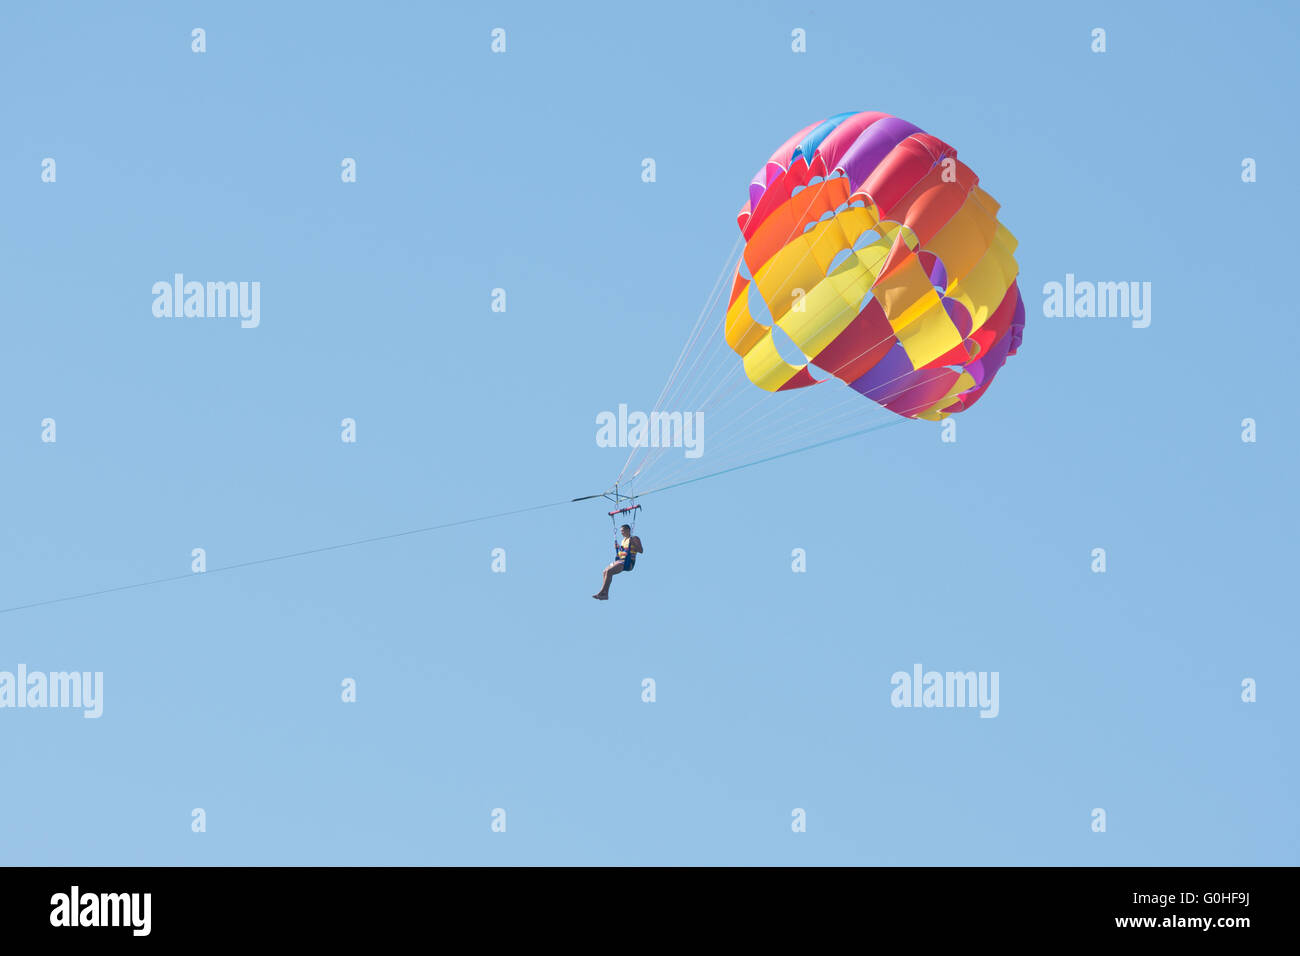 Man floating in the sky on a parachute Stock Photo